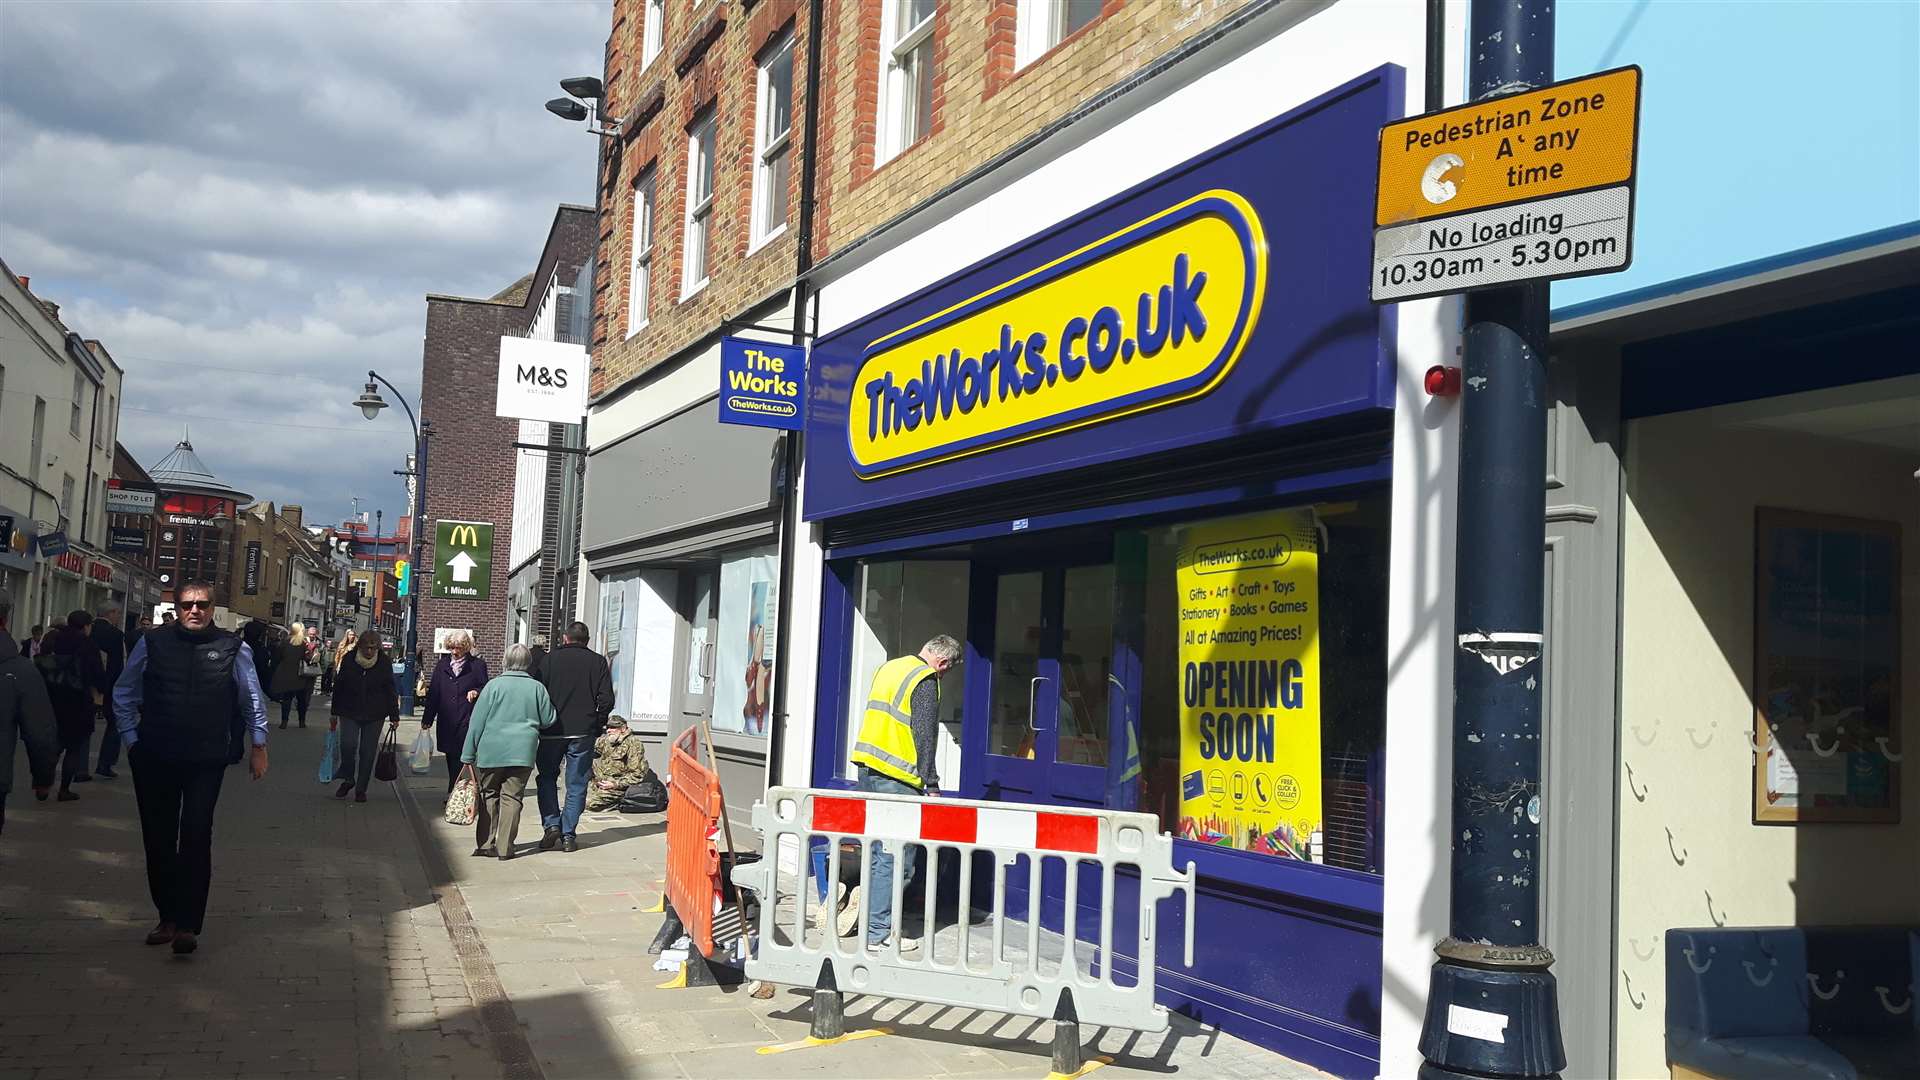 The Works is set to re-open in Week Street, Maidstone. (1292393)